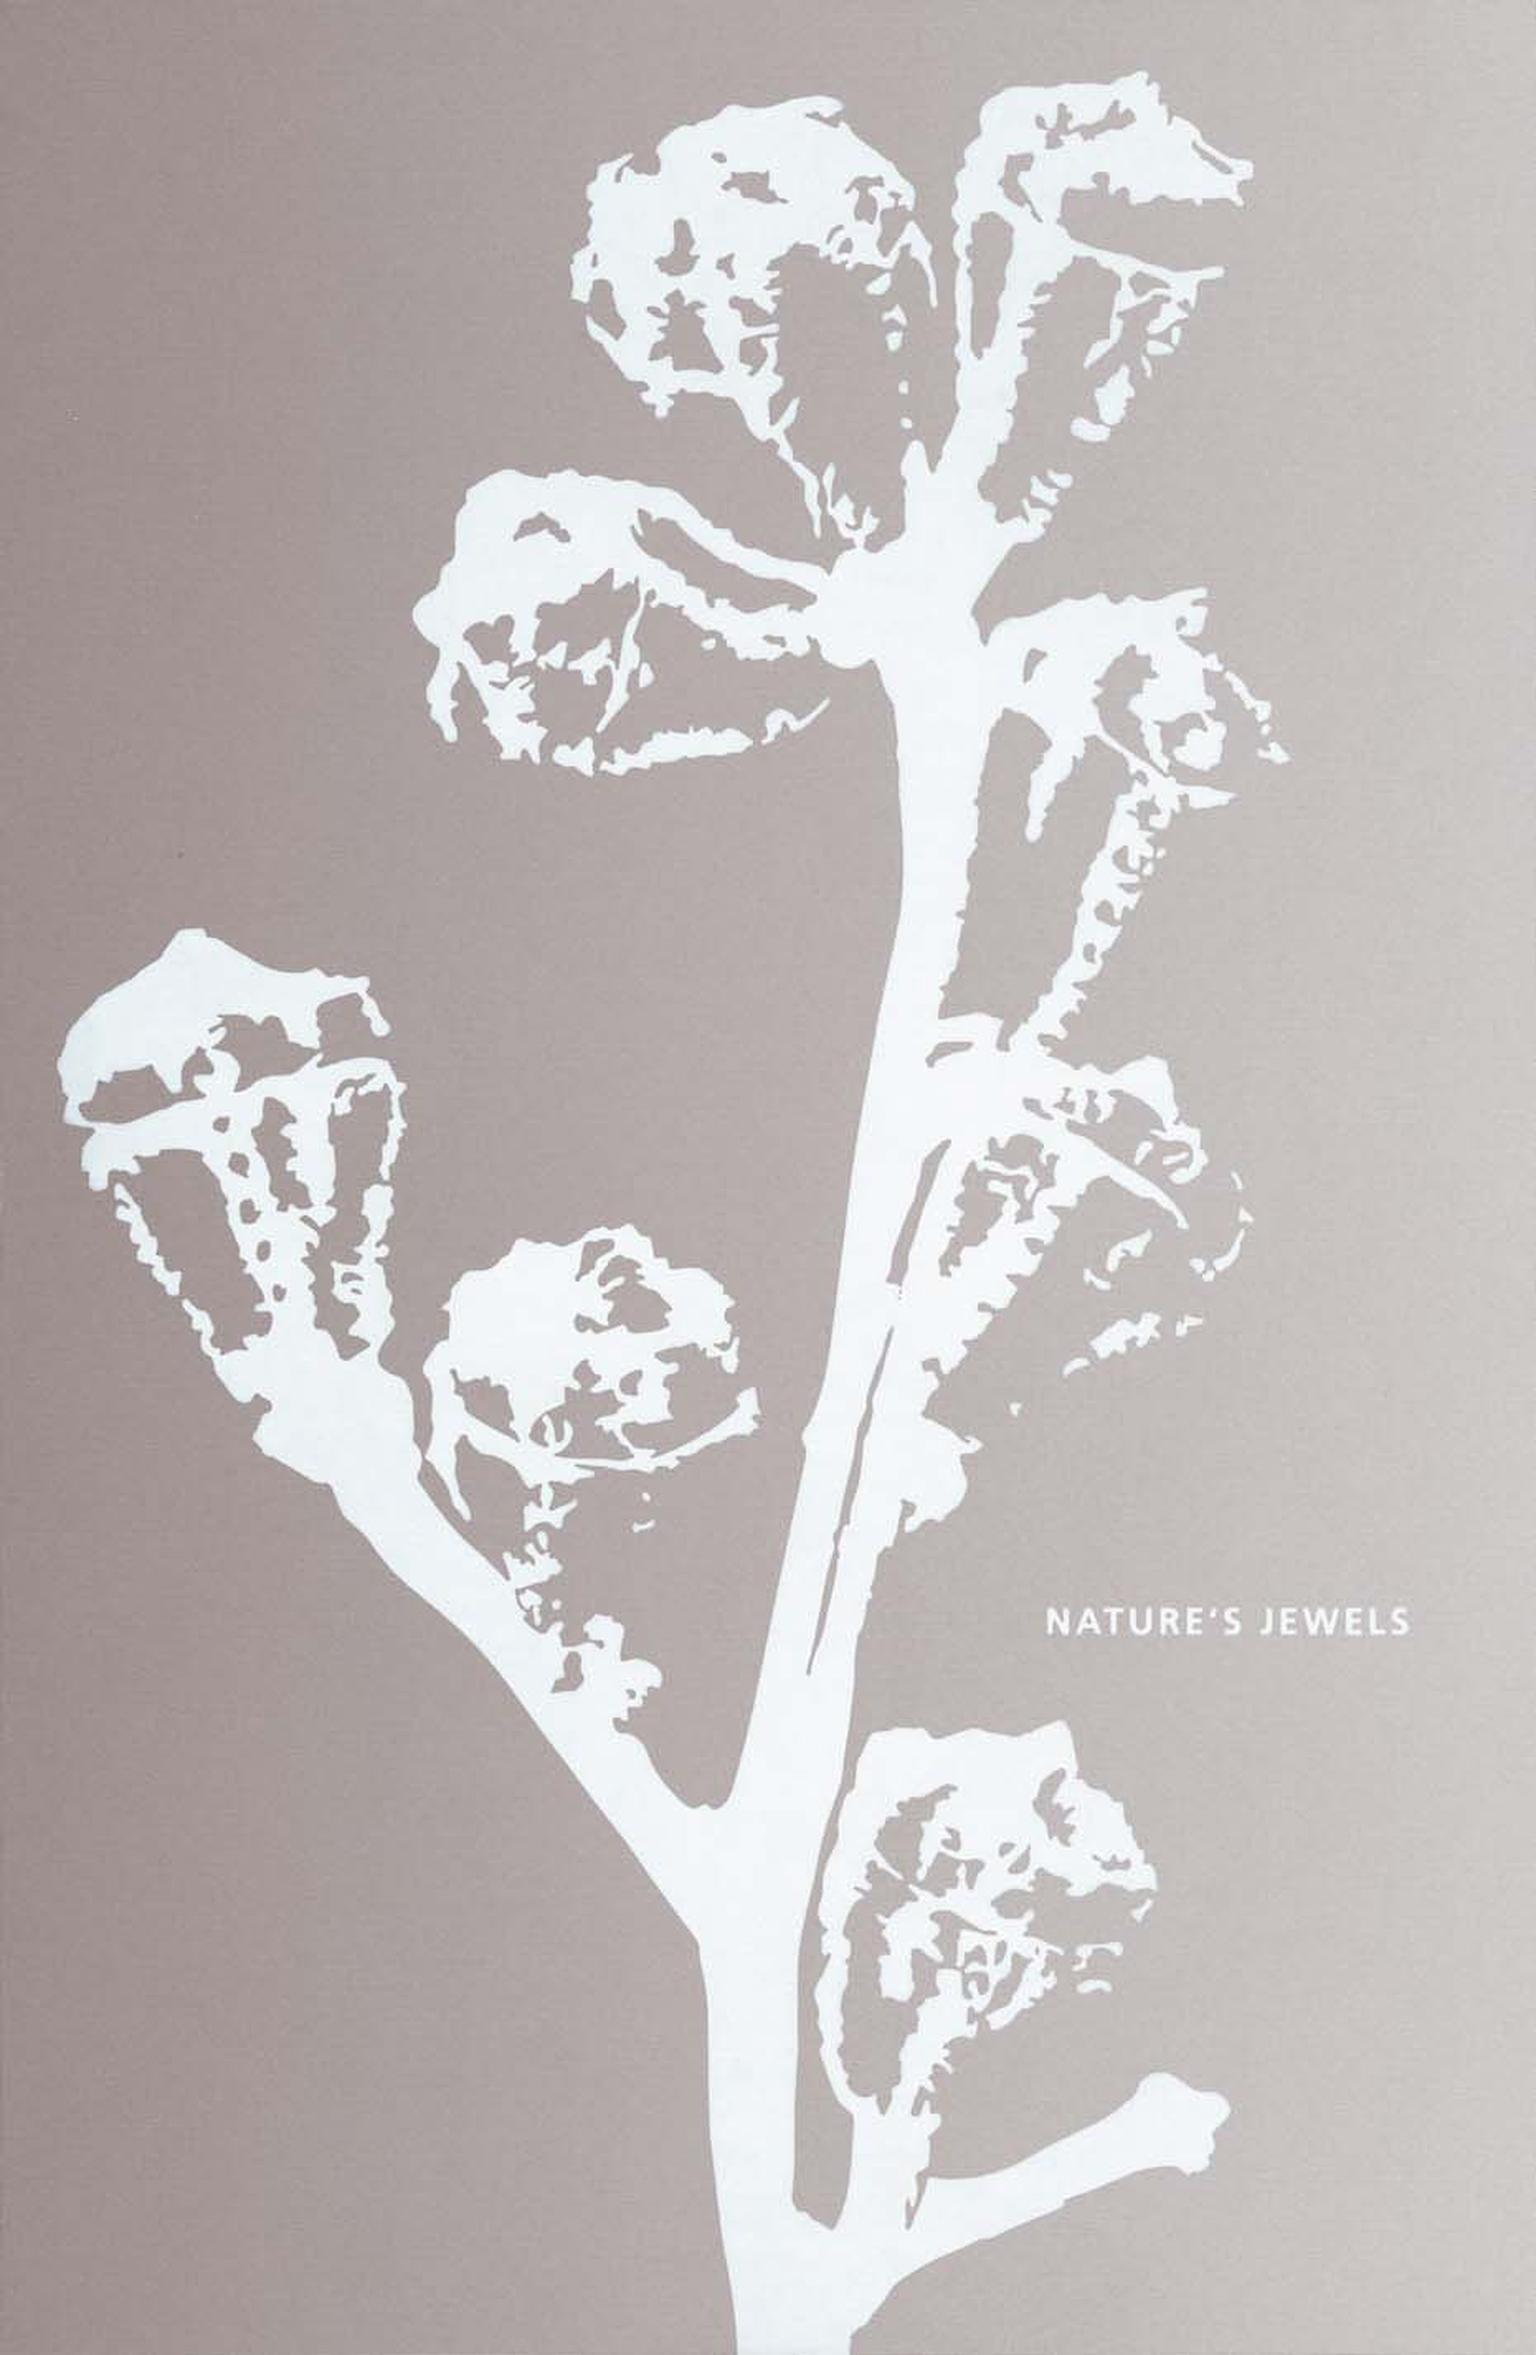 Hemmerle's new collection is accompanied by the publication of a new poetry book, titled ‘Nature’s Jewels’, which pairs each creation with a poem